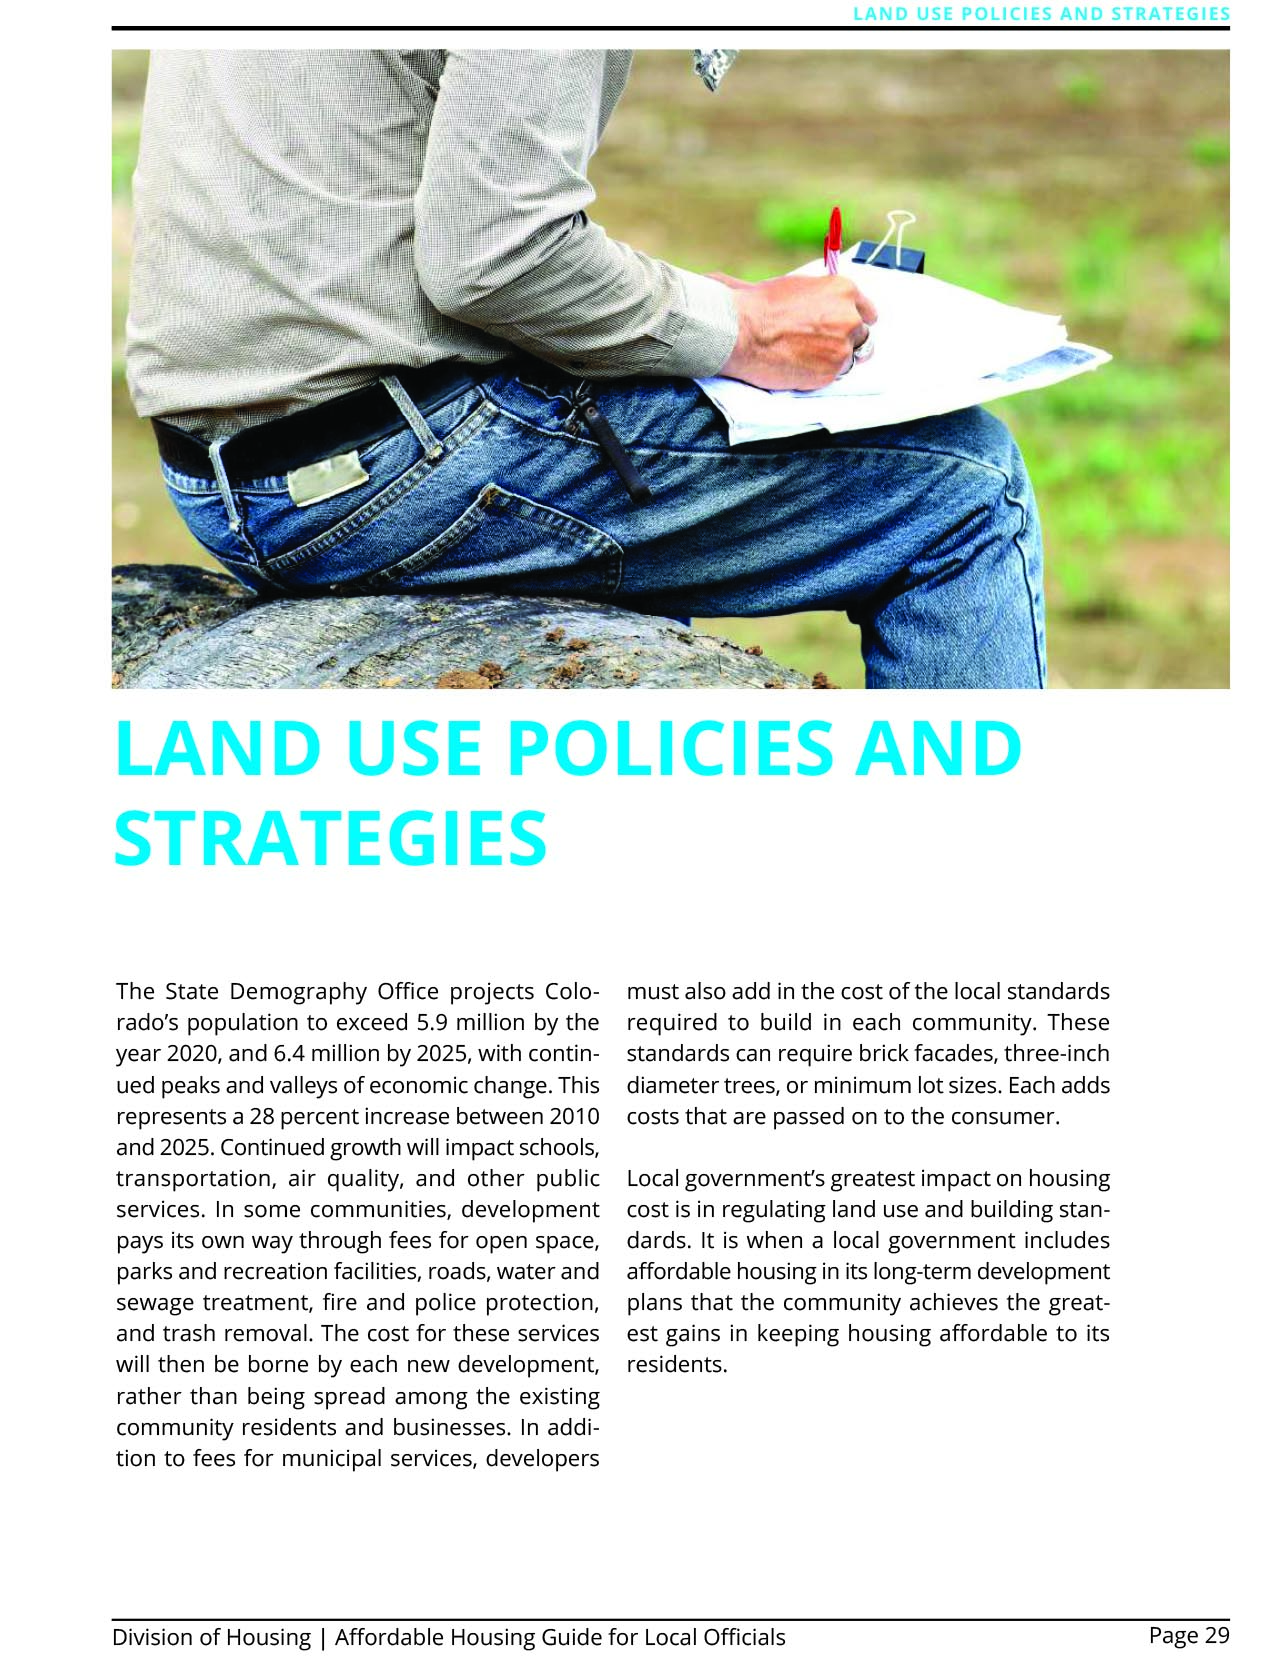 Affordable housing guide land use policies